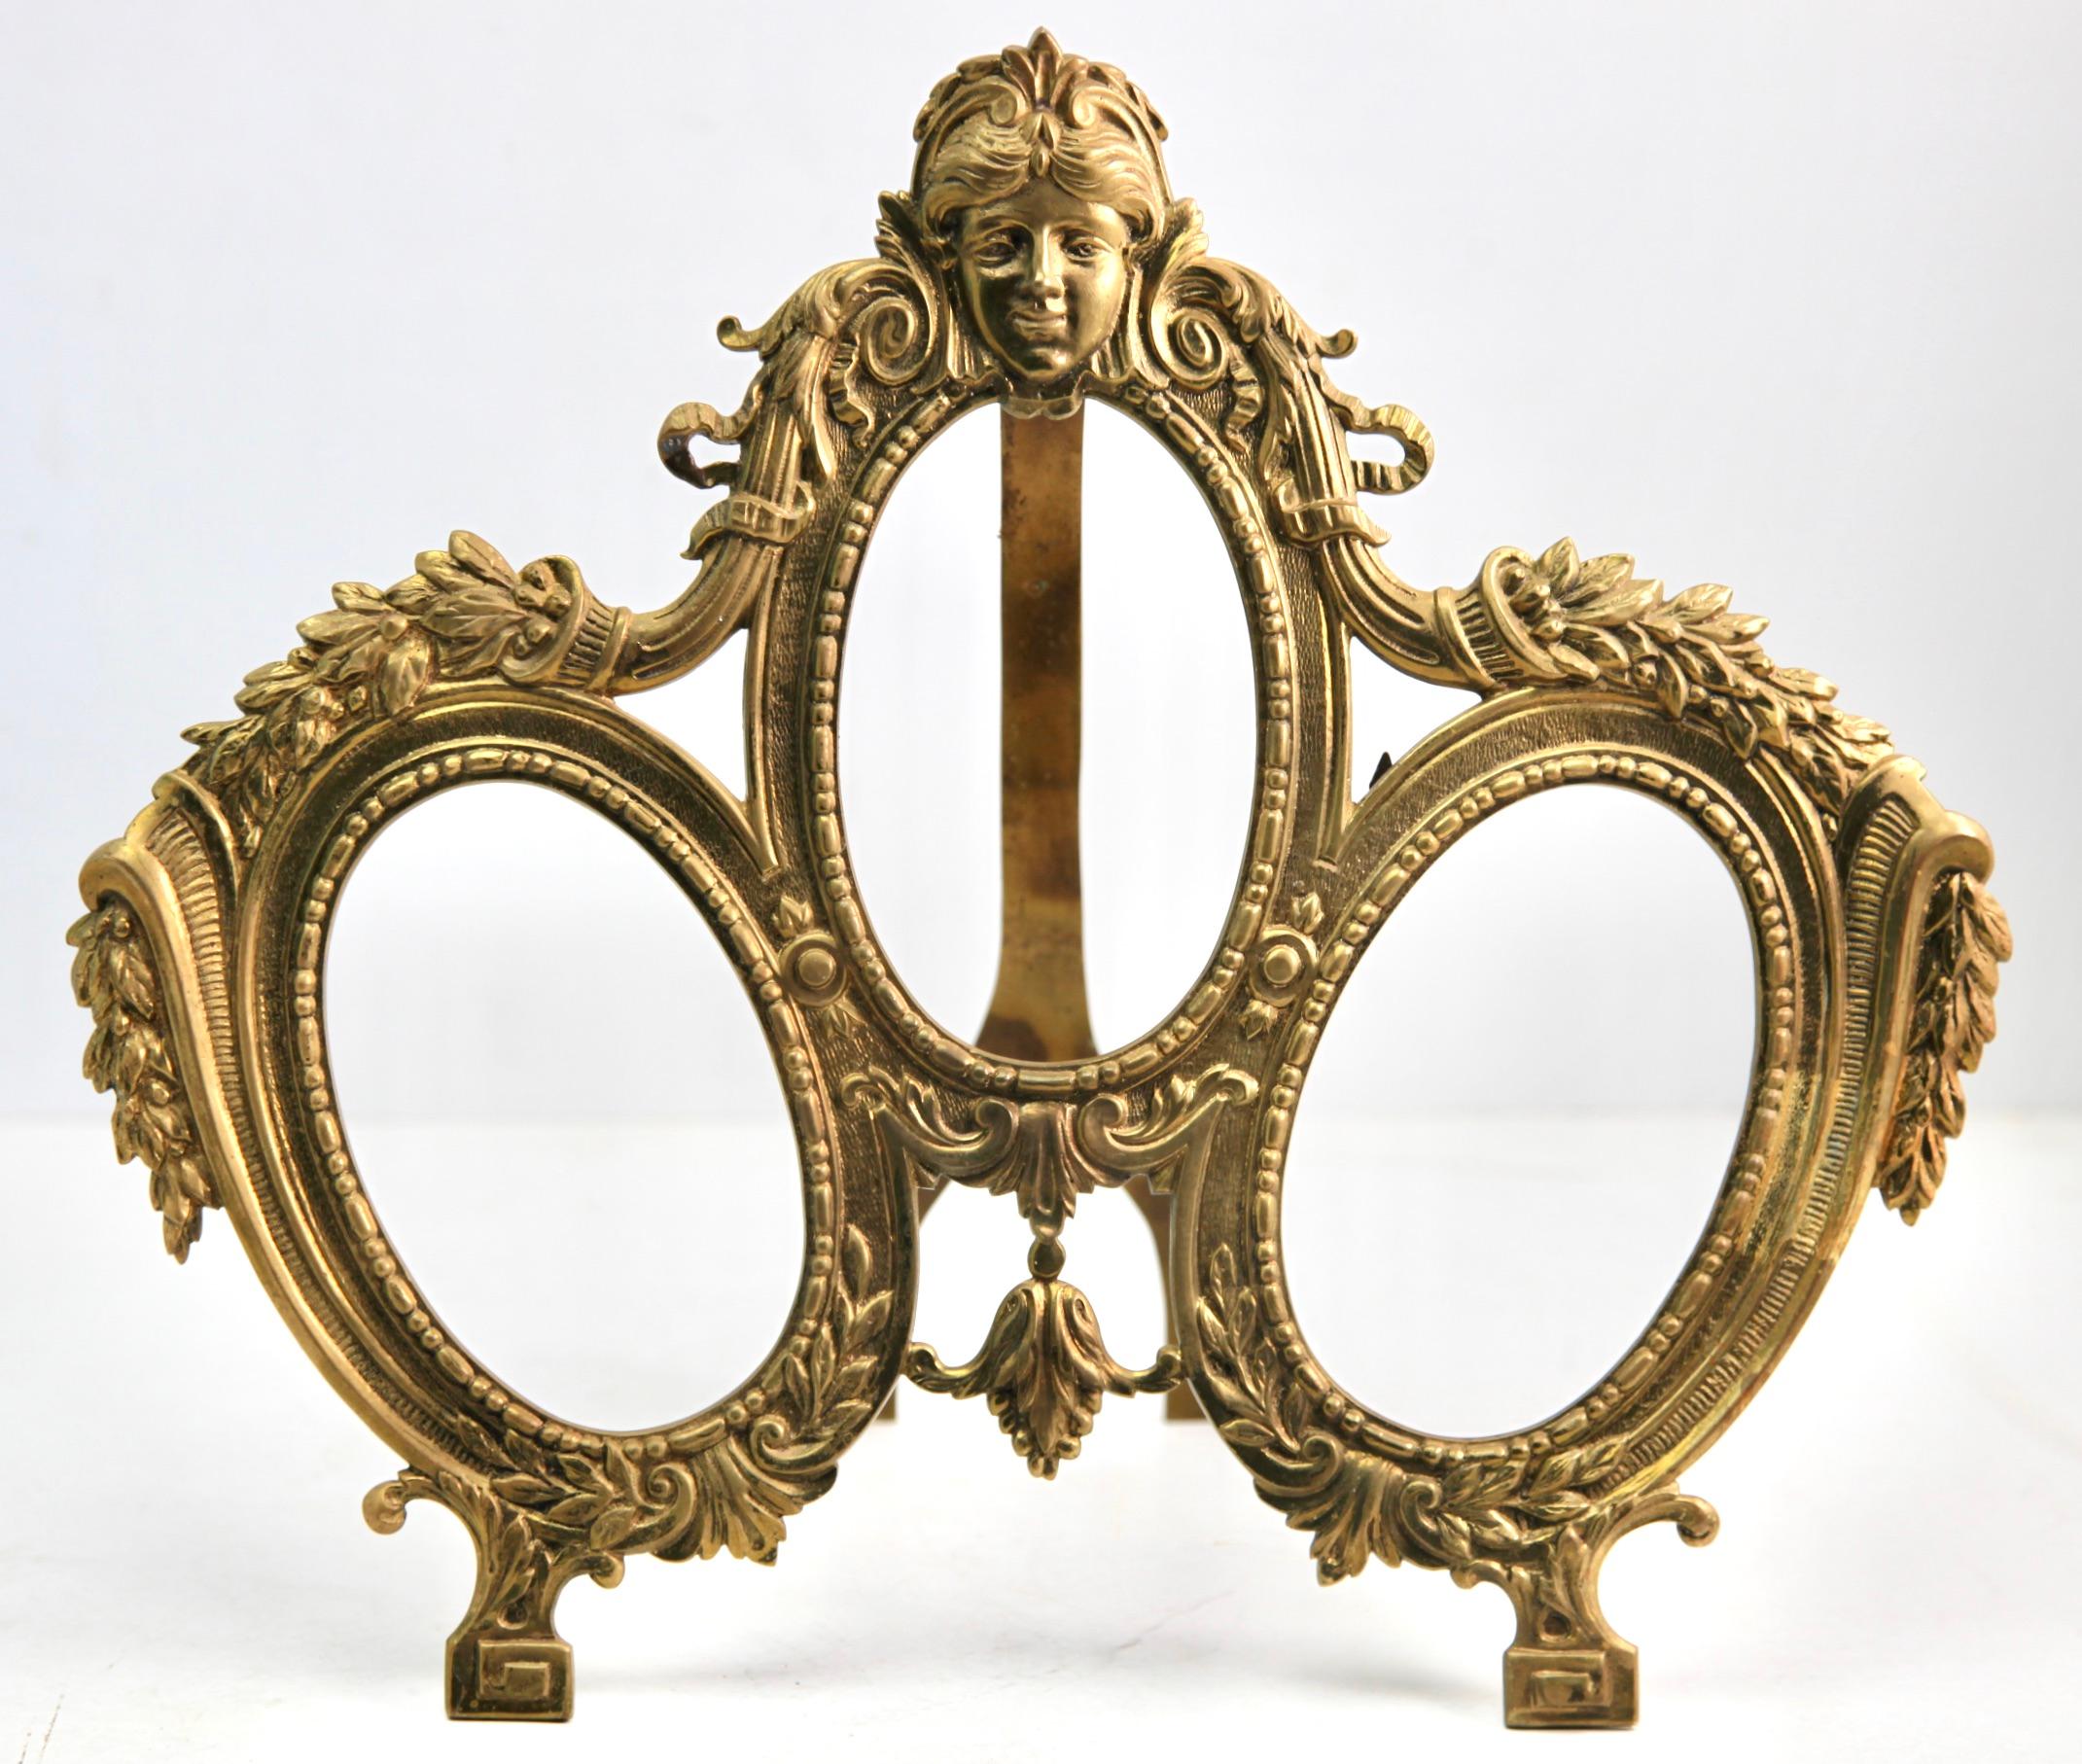 Original Victorian period triple photograph frame (or miniature frame) with classical Victorian 'Lover's Knot' design. Typical frame for wedding photographs. Made of solid cast brass with a highly polished front surface and glass front
Framed space